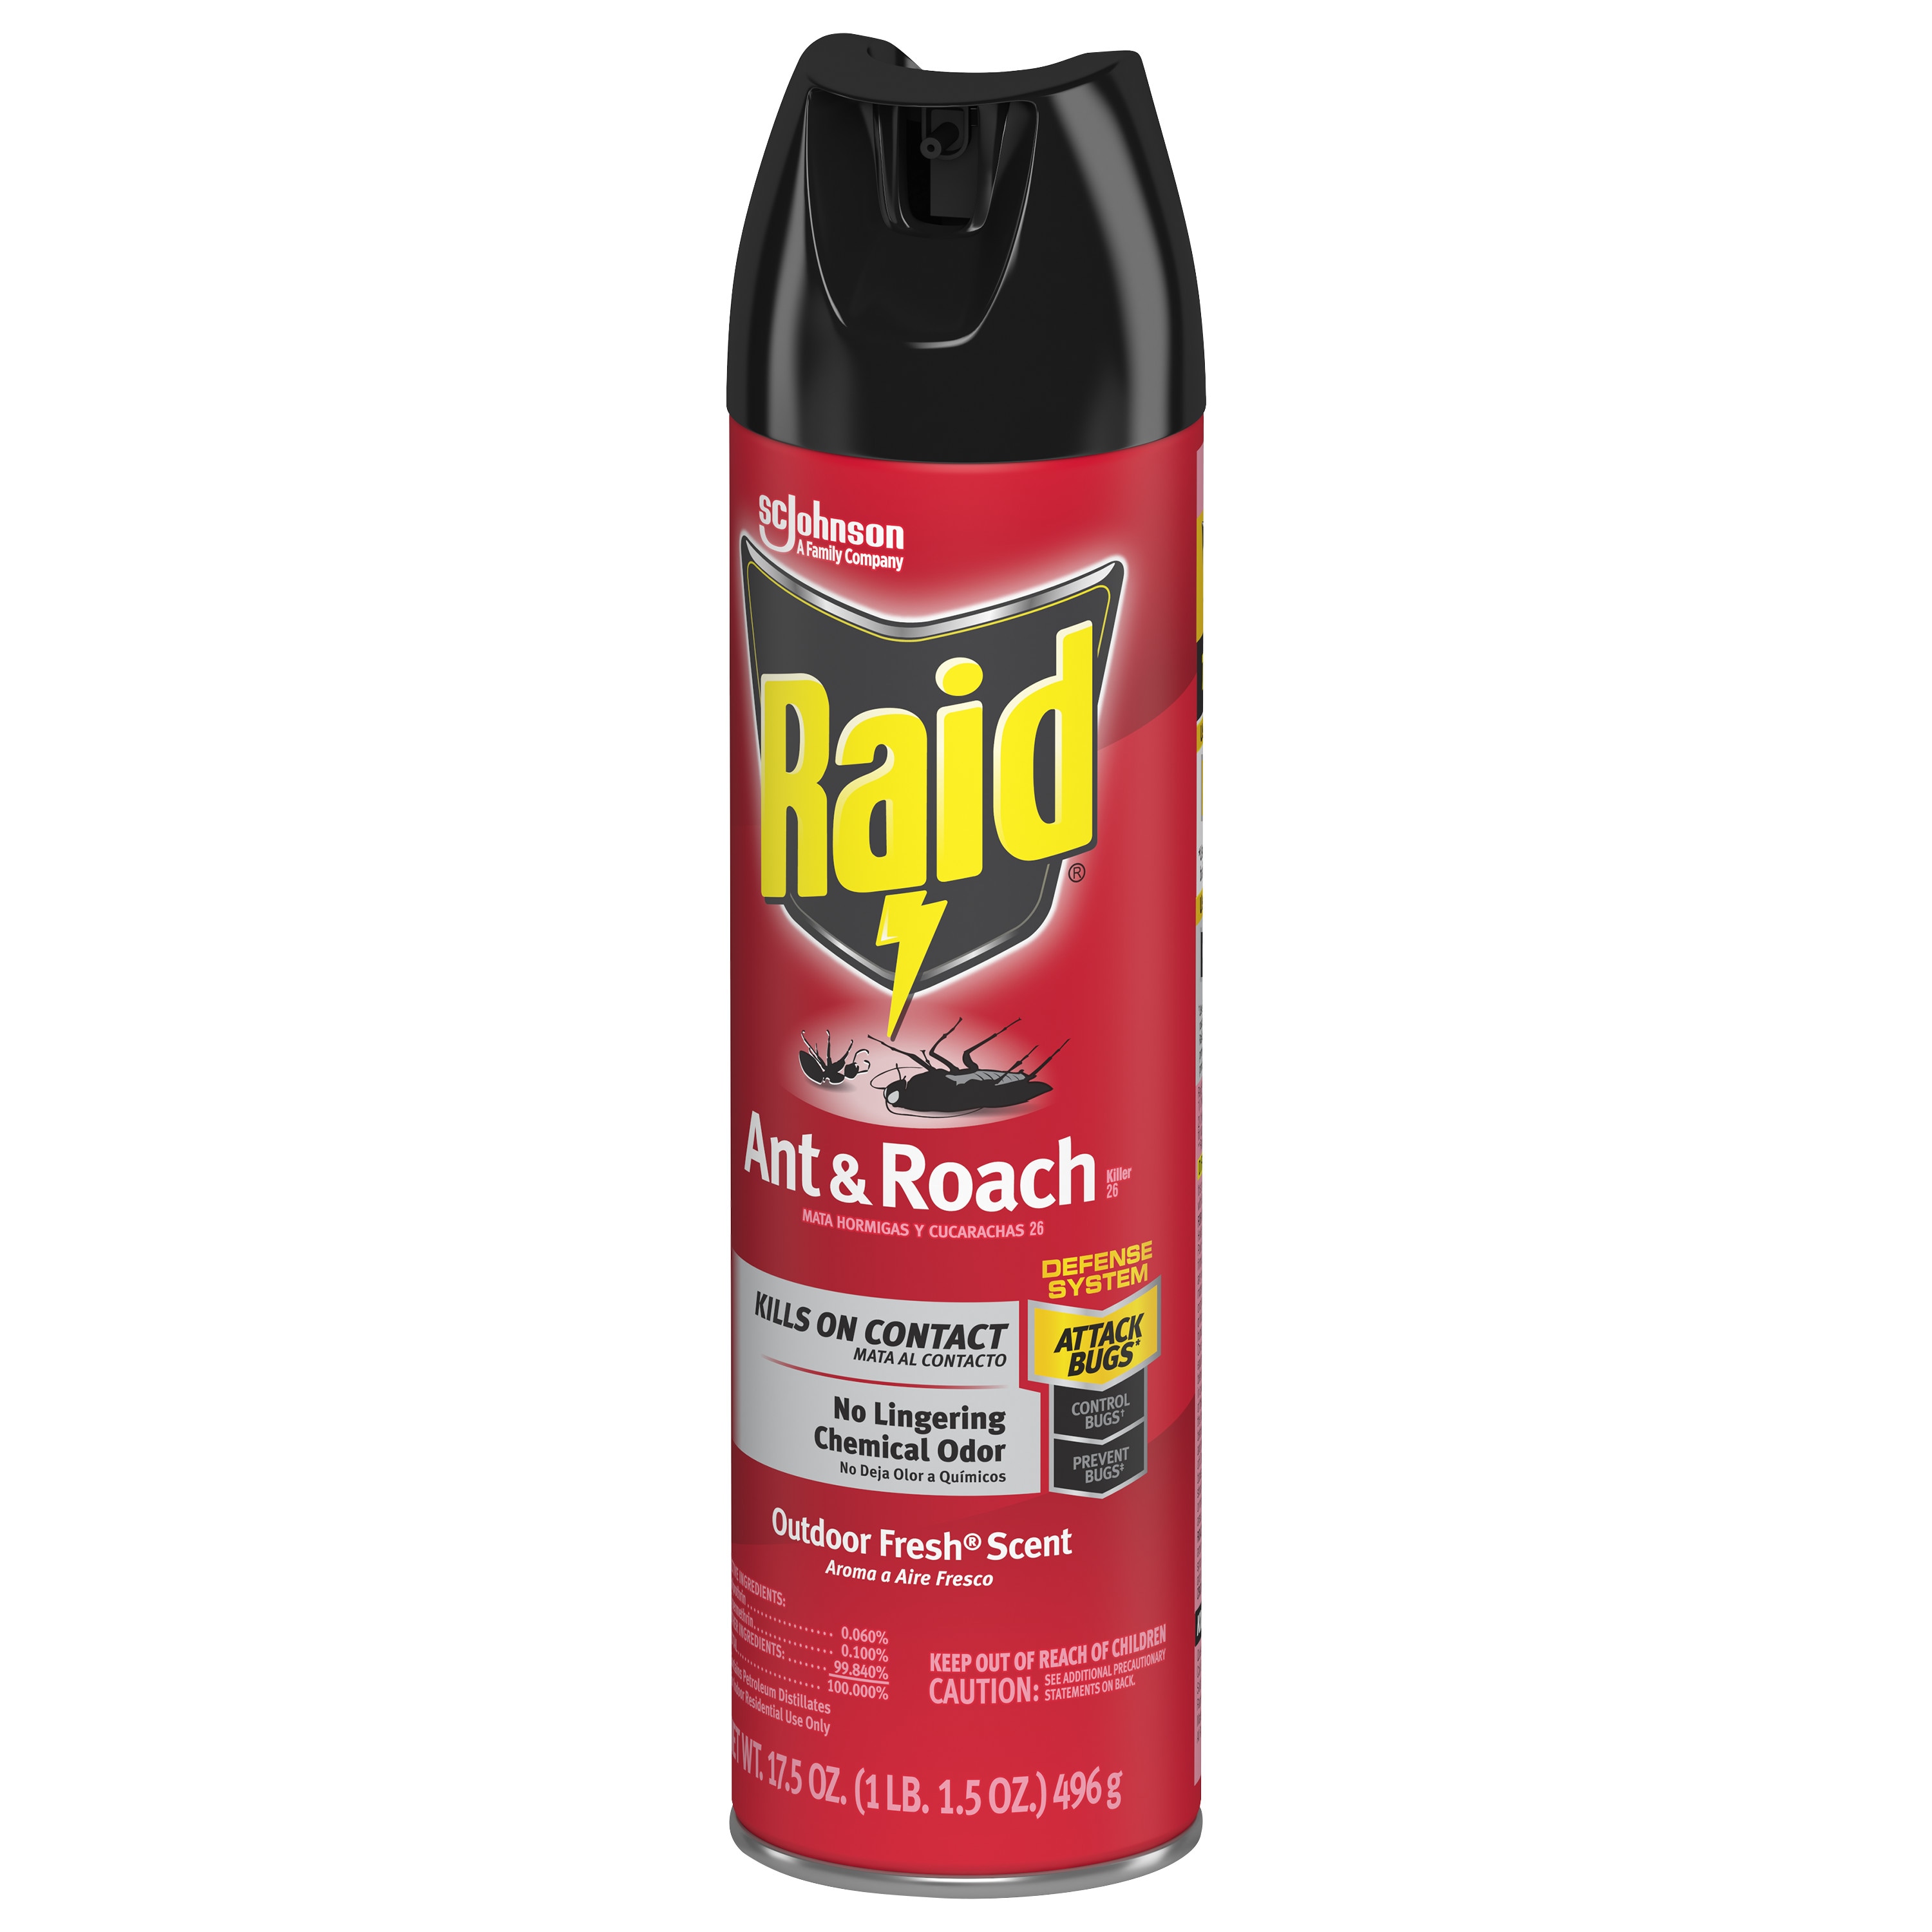 Raid Ant & Roach Killer Spray For Listed Bugs, Keeps Killing for Weeks,  Lavender Scent, 17.5 oz